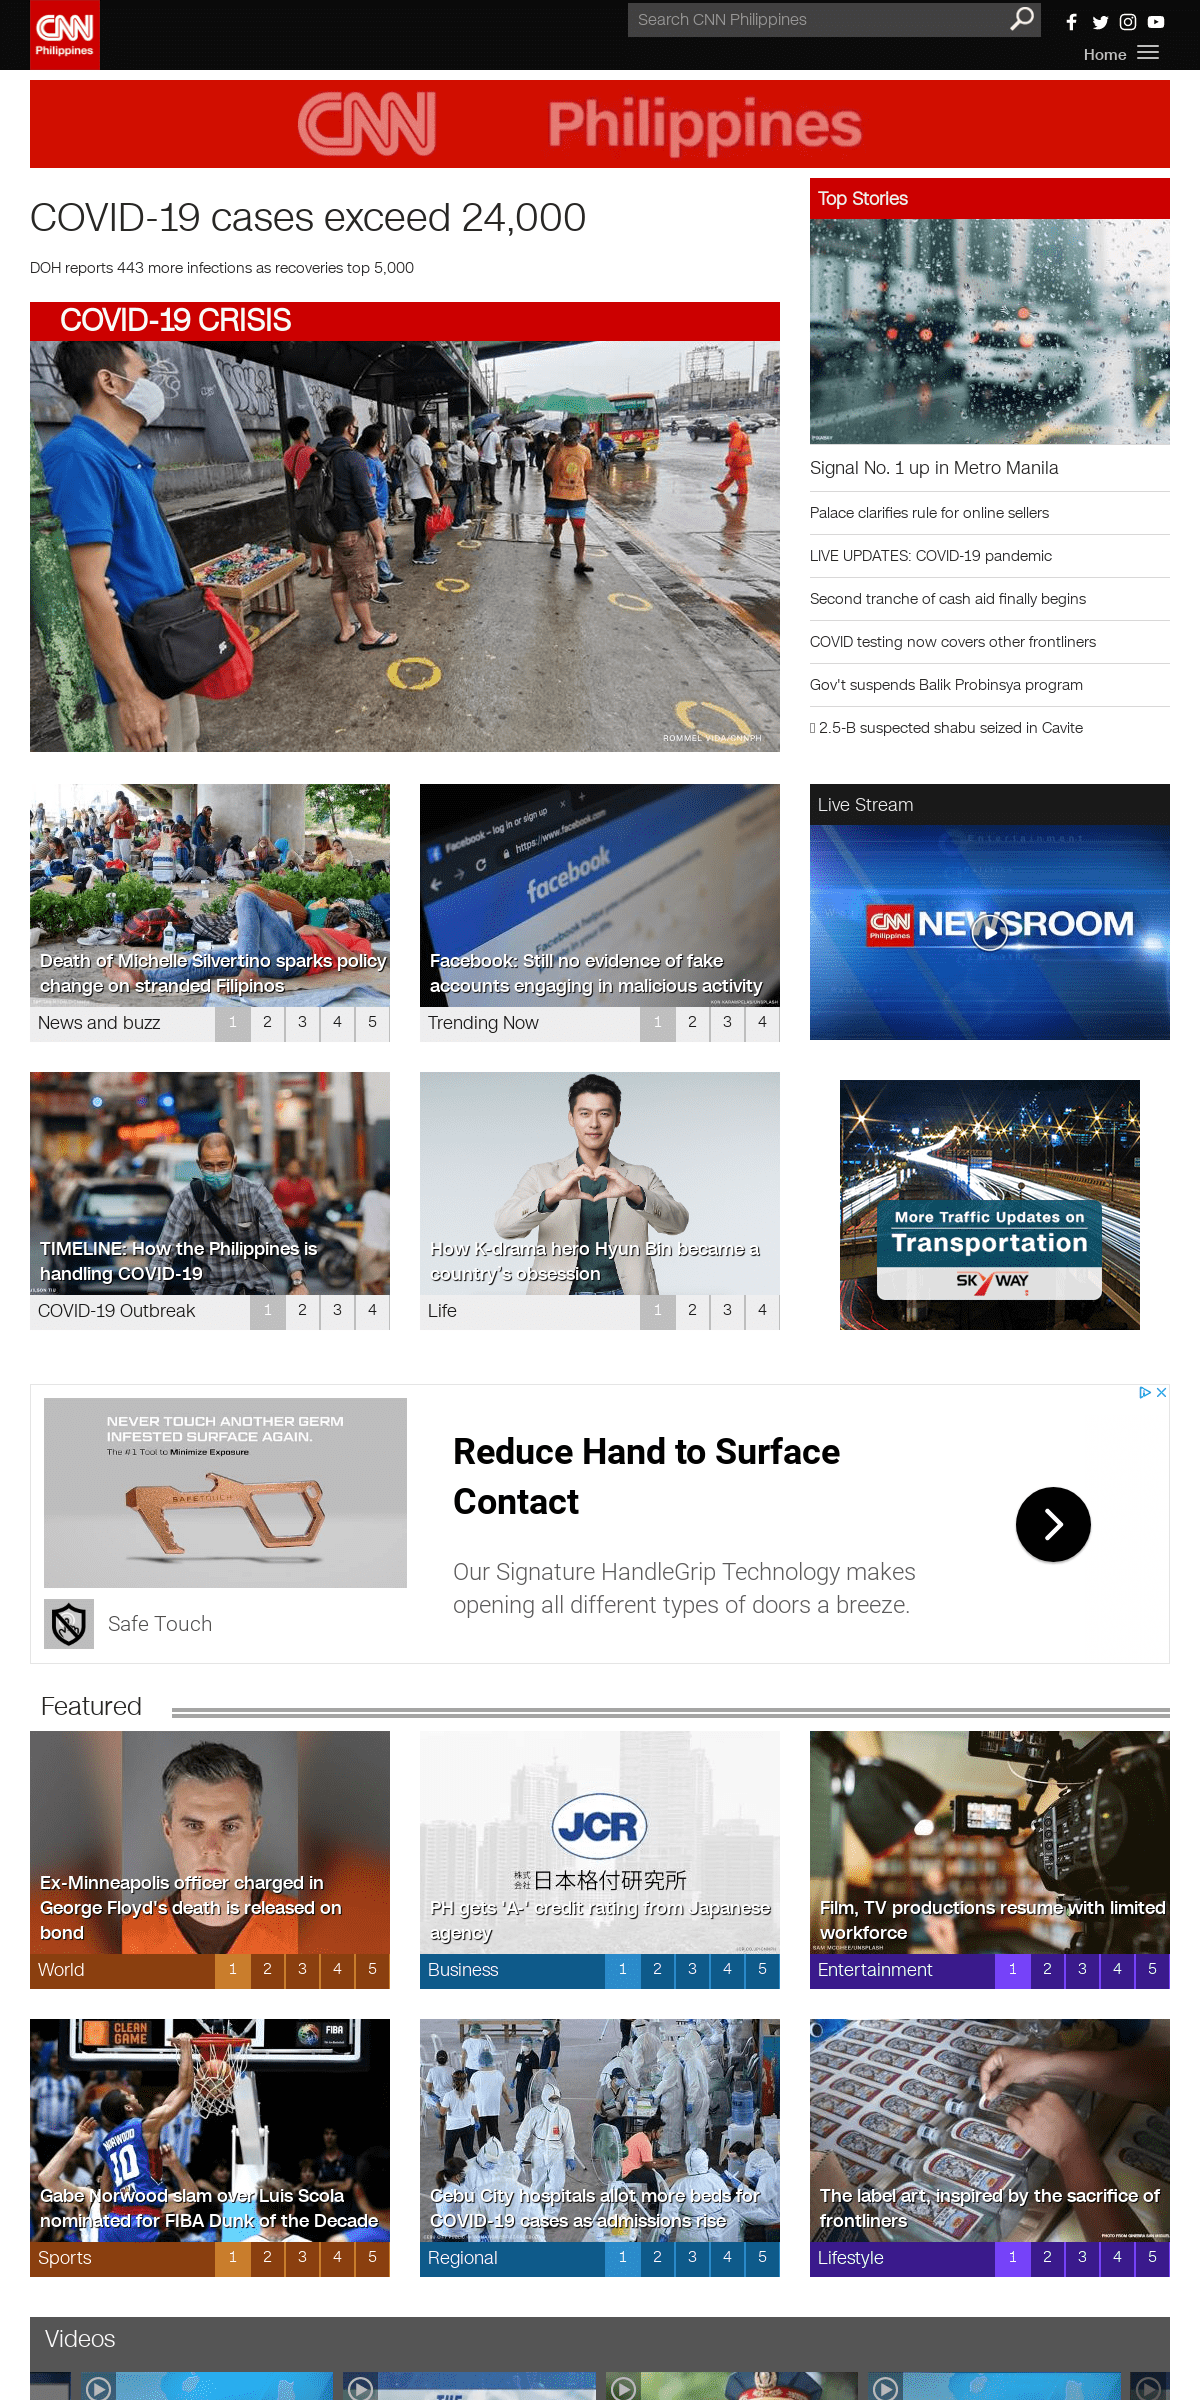 A complete backup of cnnphilippines.com